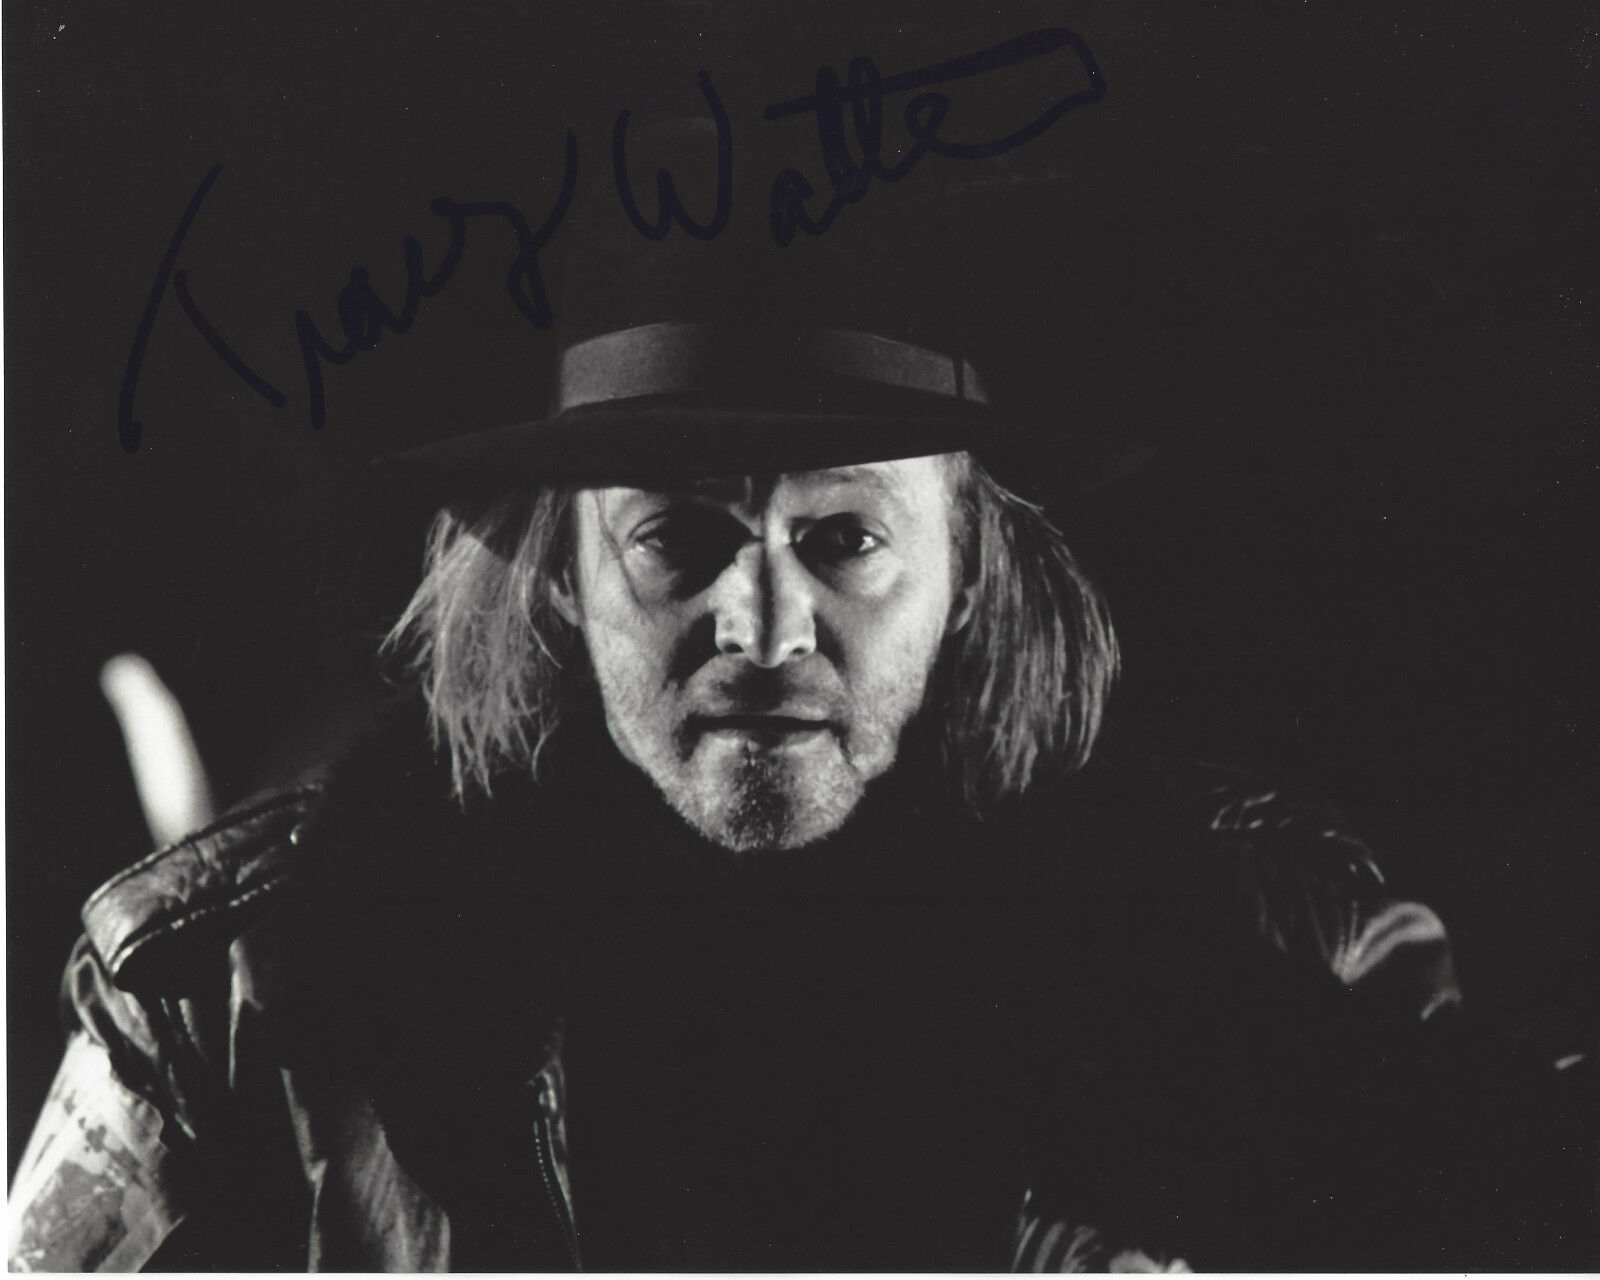 TRACEY WALTER SIGNED AUTHENTIC BATMAN 'BOB THE GOON' 8X10 Photo Poster painting E w/COA ACTOR